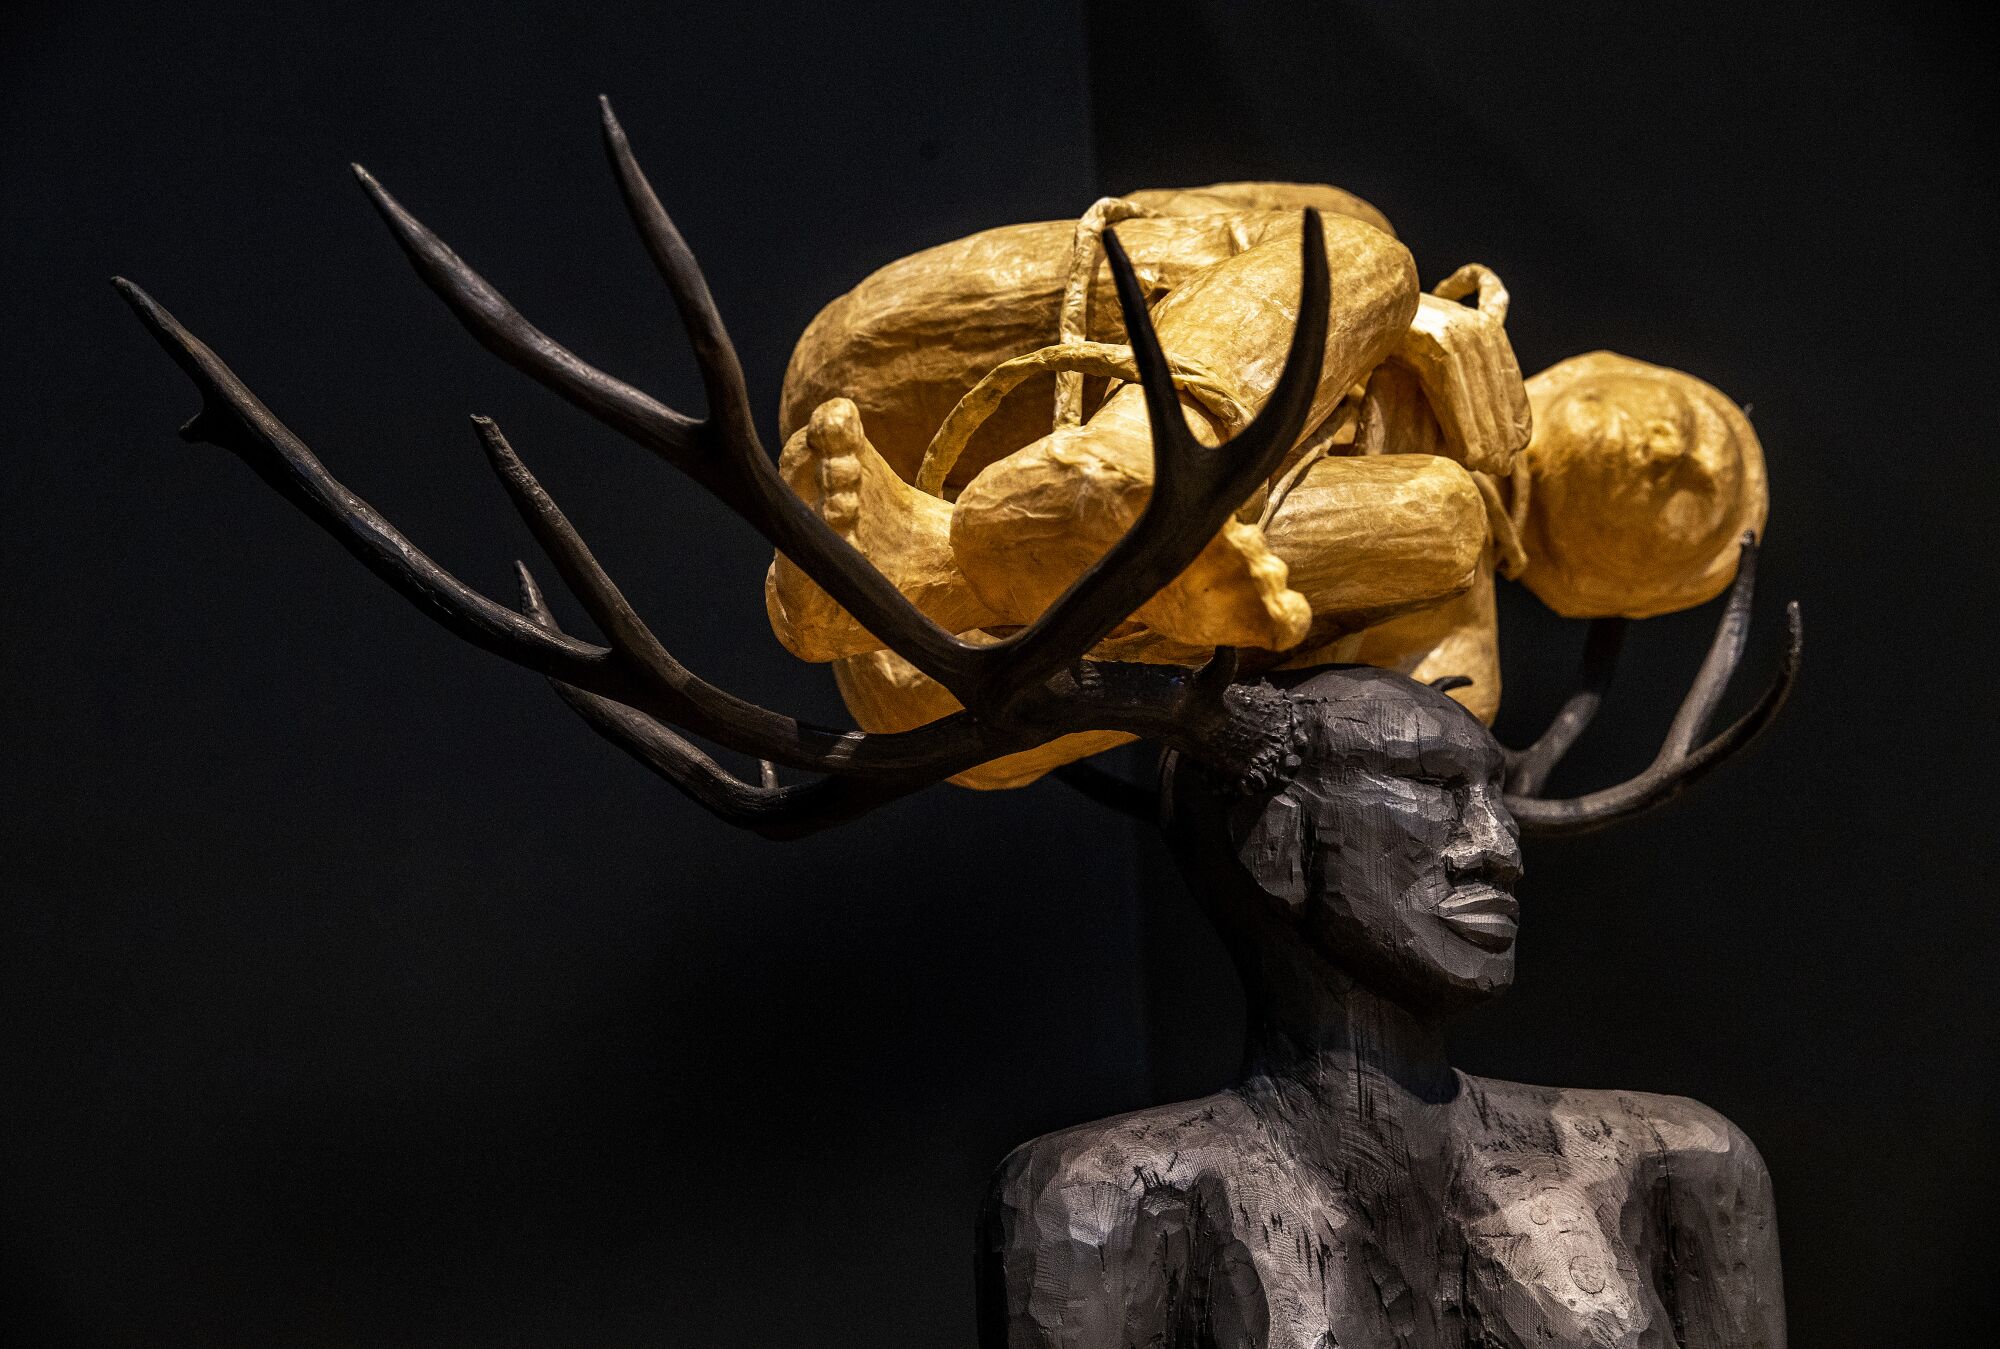 A detail from a wooden sculpture shows a Black woman with antlers supporting the form of another woman on her head